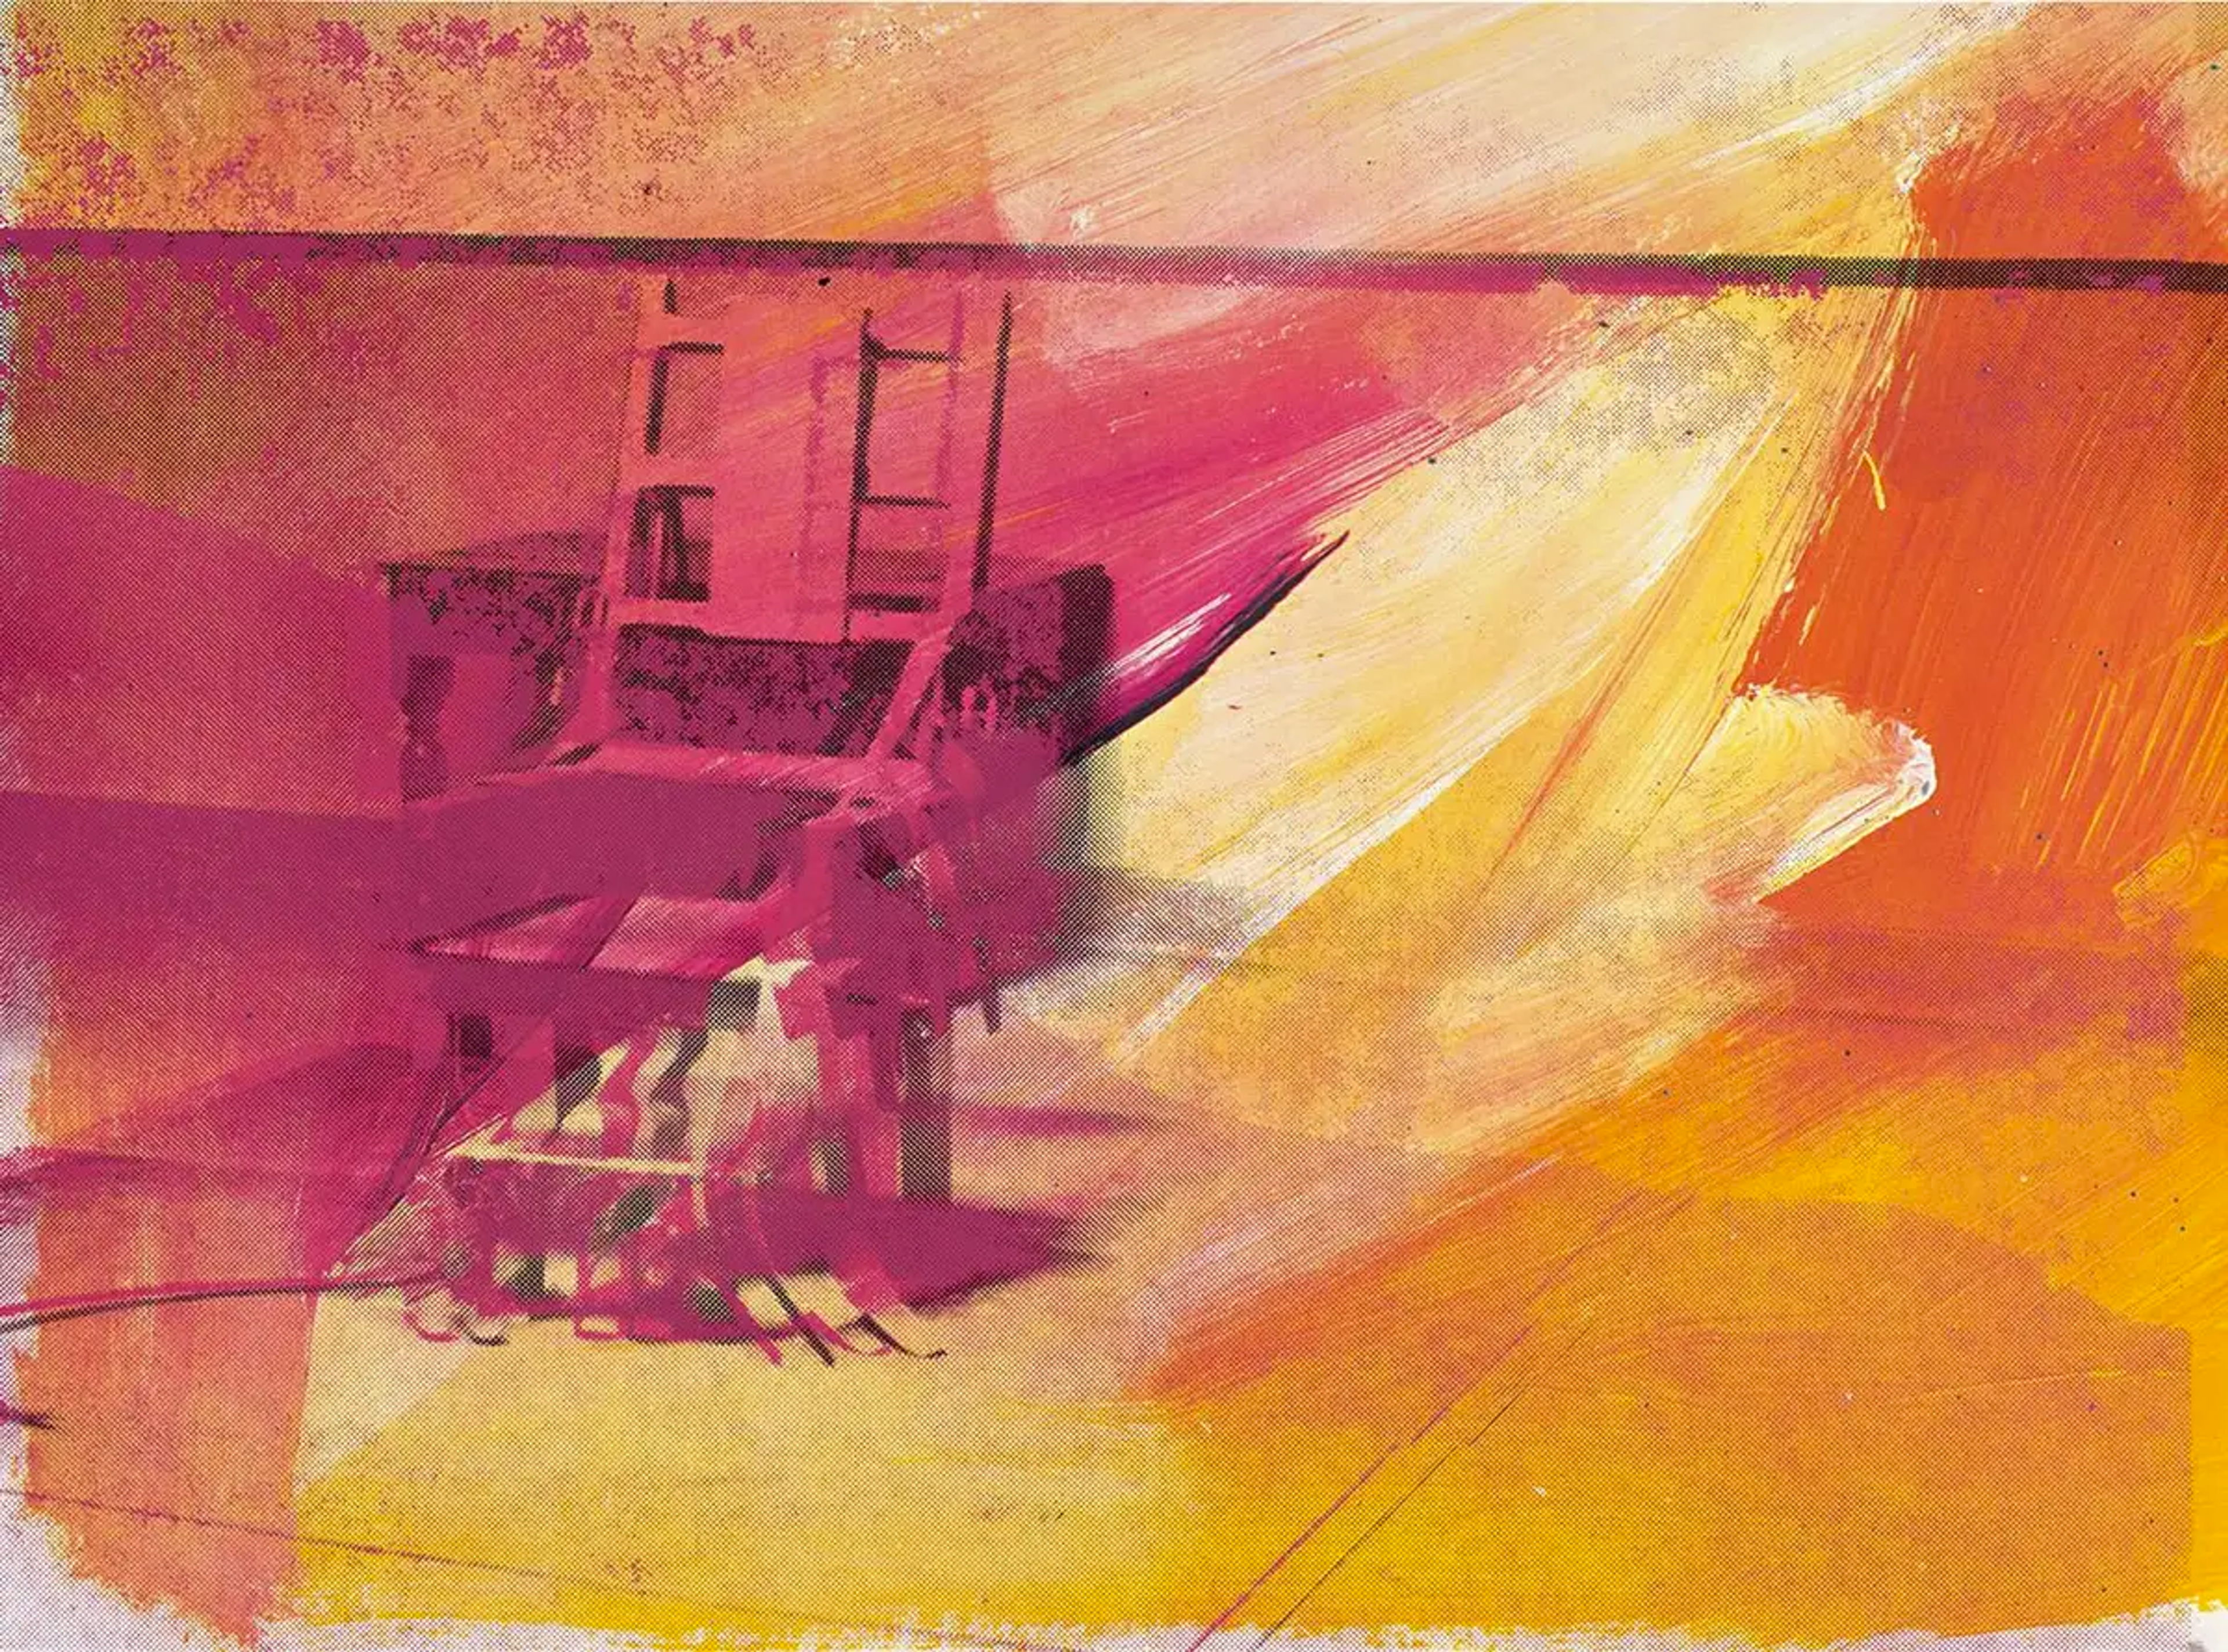 The print Electric Chair (F. & S. II. 81) features an image of an empty electric chair, repurposed from a newspaper clipping about the high-profile executions of Julius and Ethel Rosenberg. Warhol creates a screen print of the photograph retaining much of its original, grainy quality. Notably, however, the artist has painted over the photographic image with sweeping, gestural strokes in pink and orange.